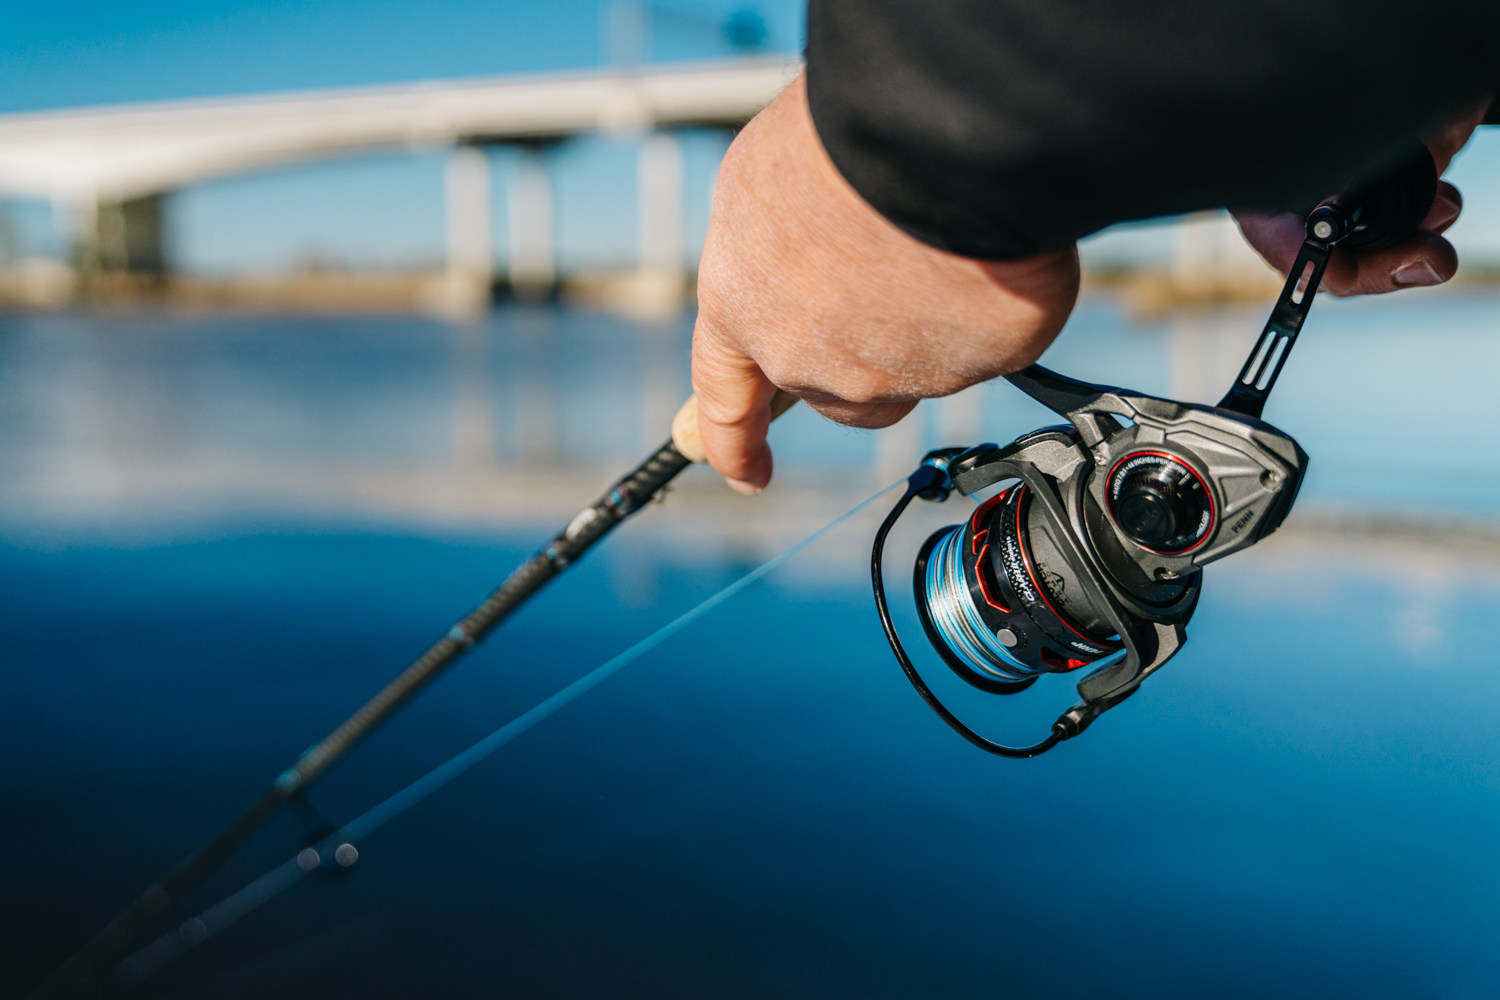 Penn Clash II 3000 spinning reel review - around £180 here in the